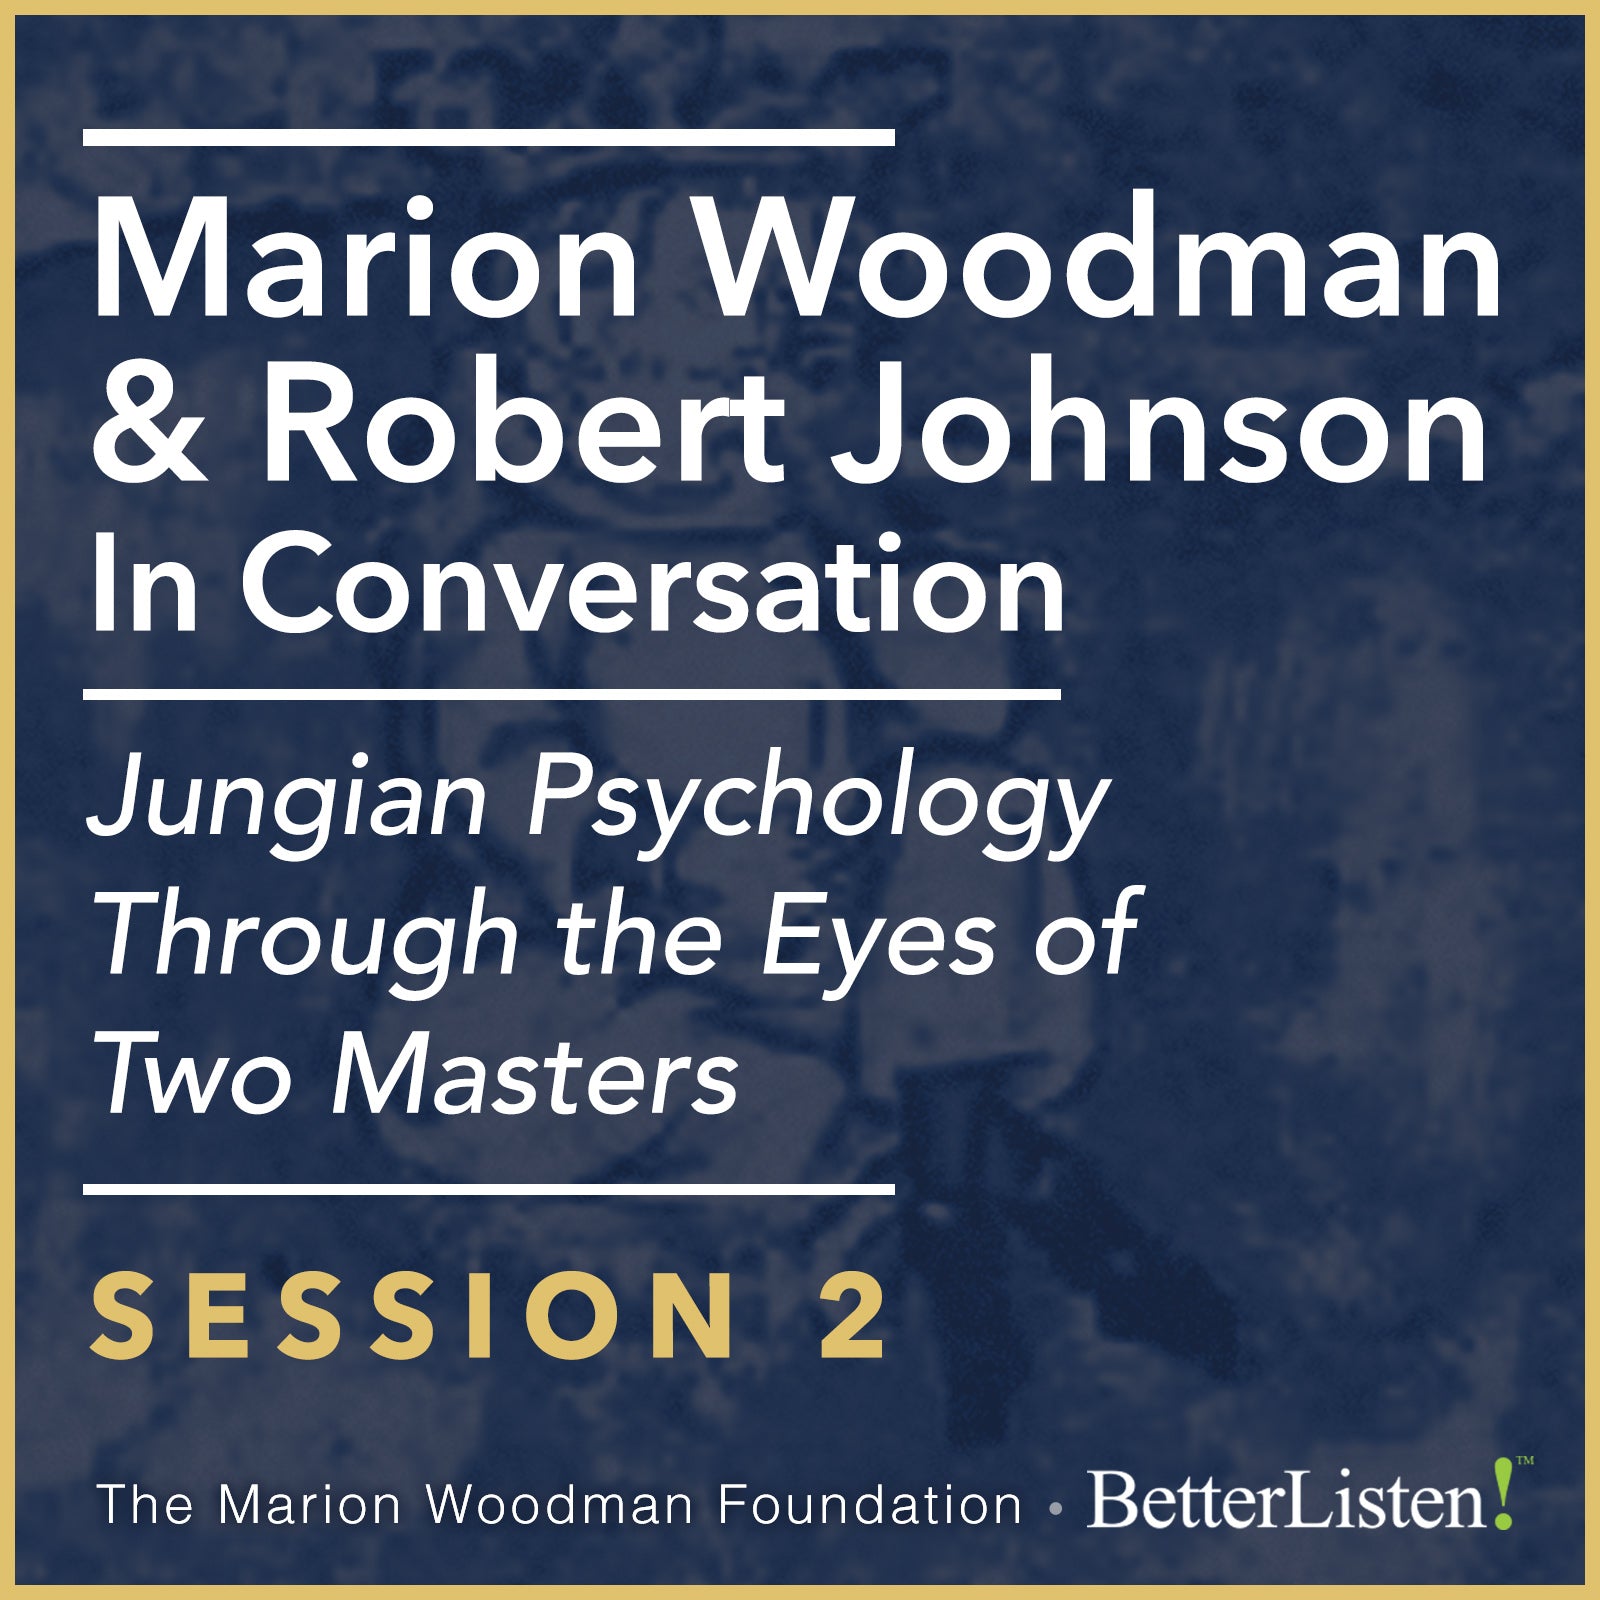 Marion Woodman & Robert Johnson In Conversation: SESSION 2 - Video, Jungian Psychology Through The Eyes of Two Masters